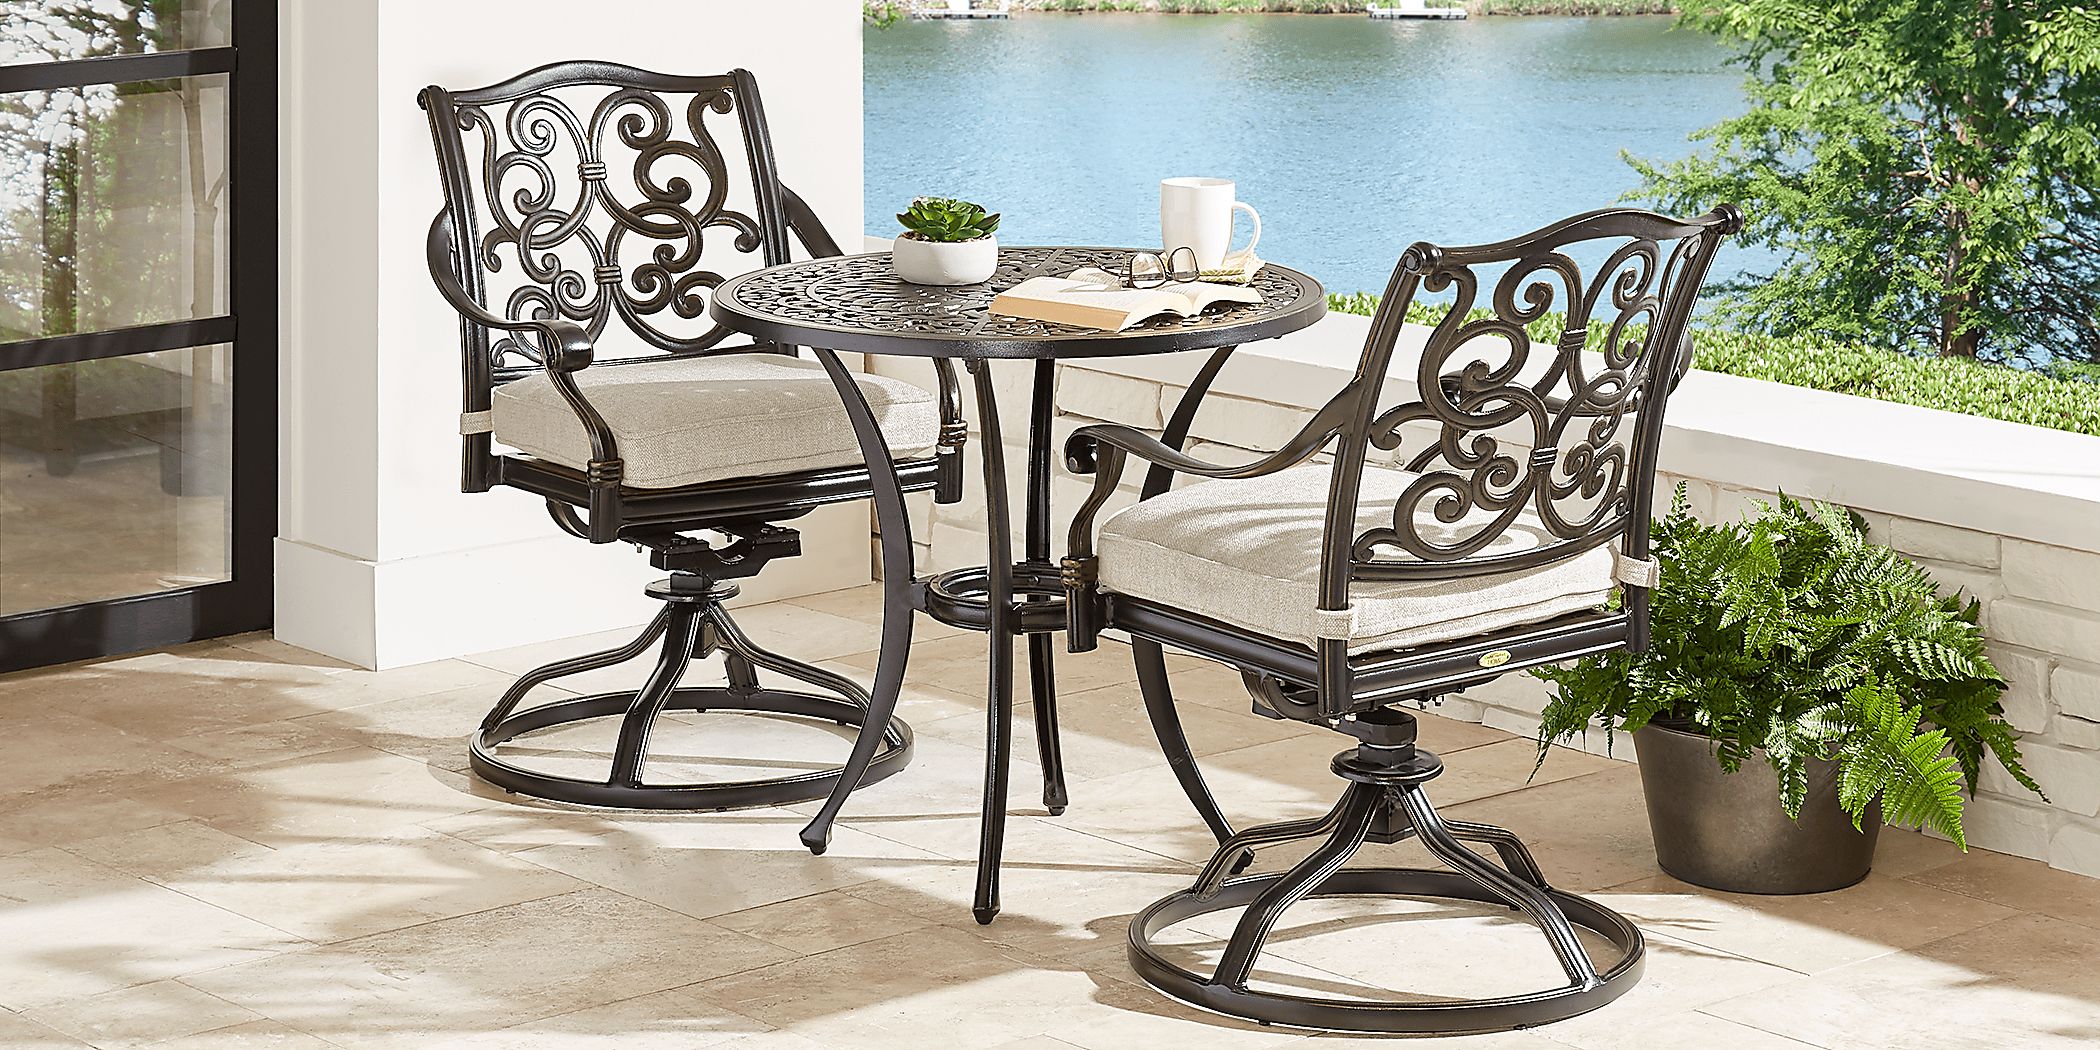 Lake Como 3 Pc Antique Bronze Round Outdoor Dining Set with Silk-Color Cushions